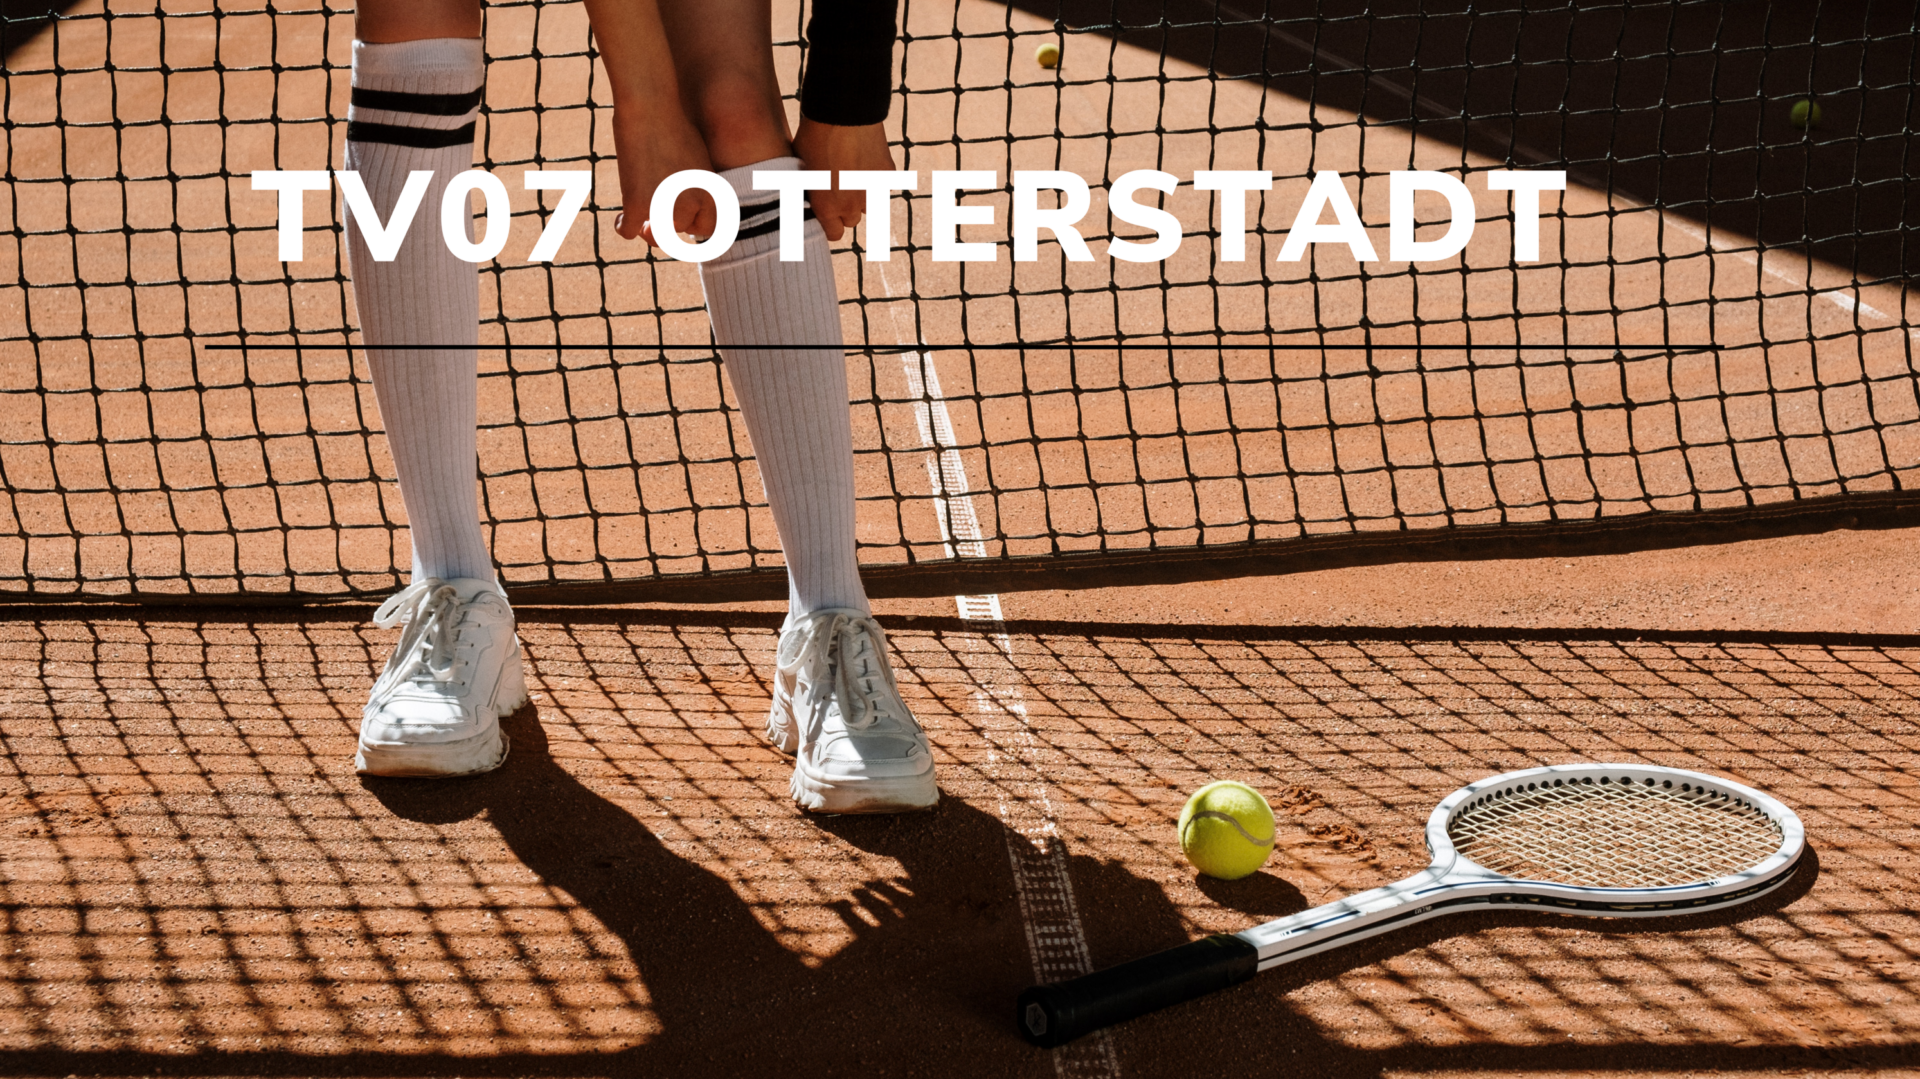 cropped-TV07-Otterstadt-2.png